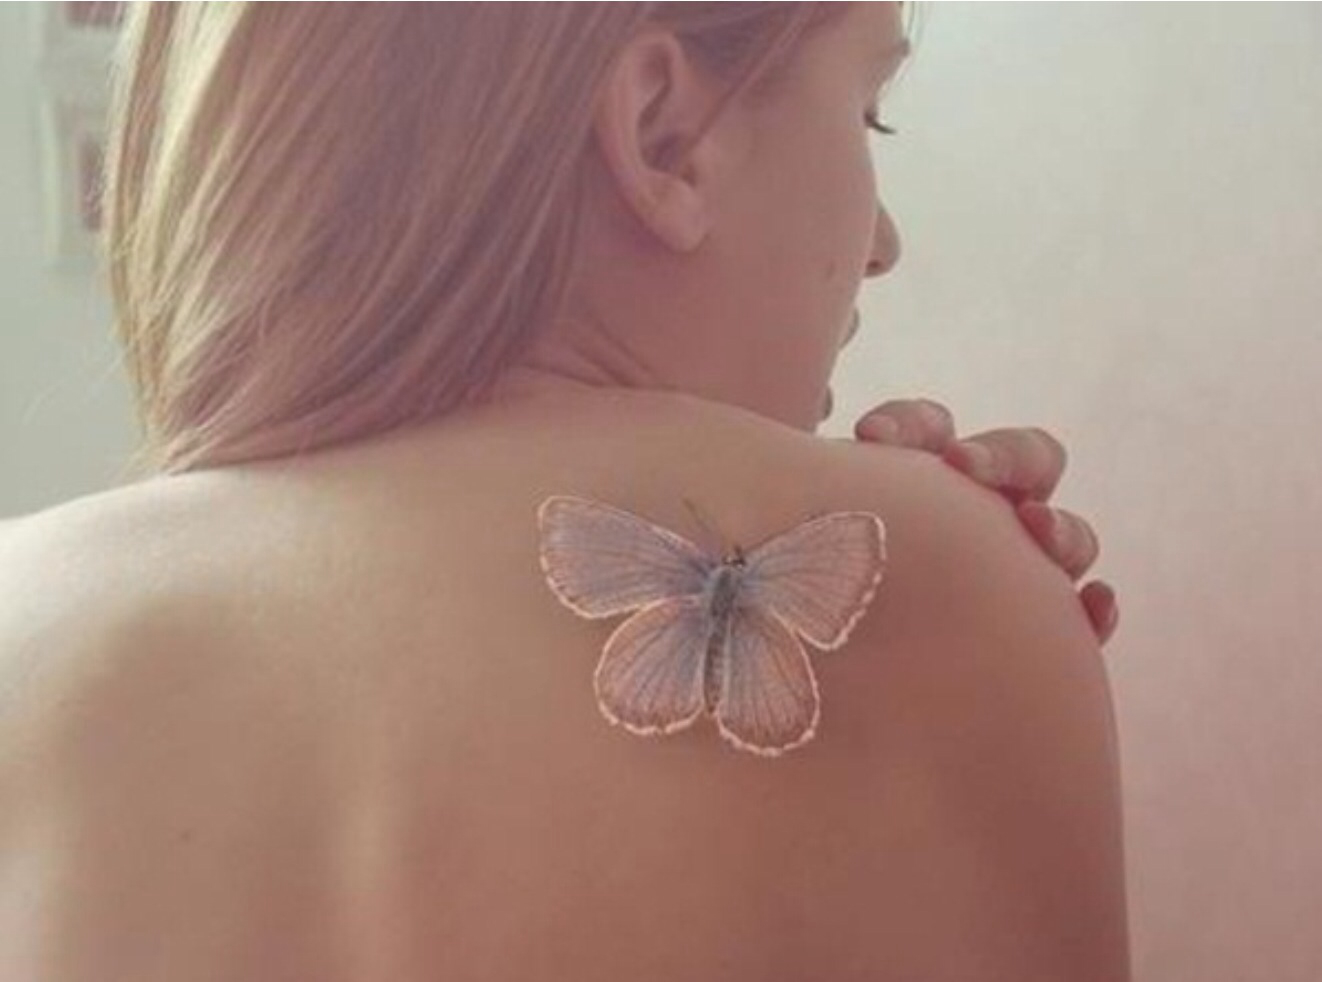 White butterfly tattoo on girl’s right shoulder